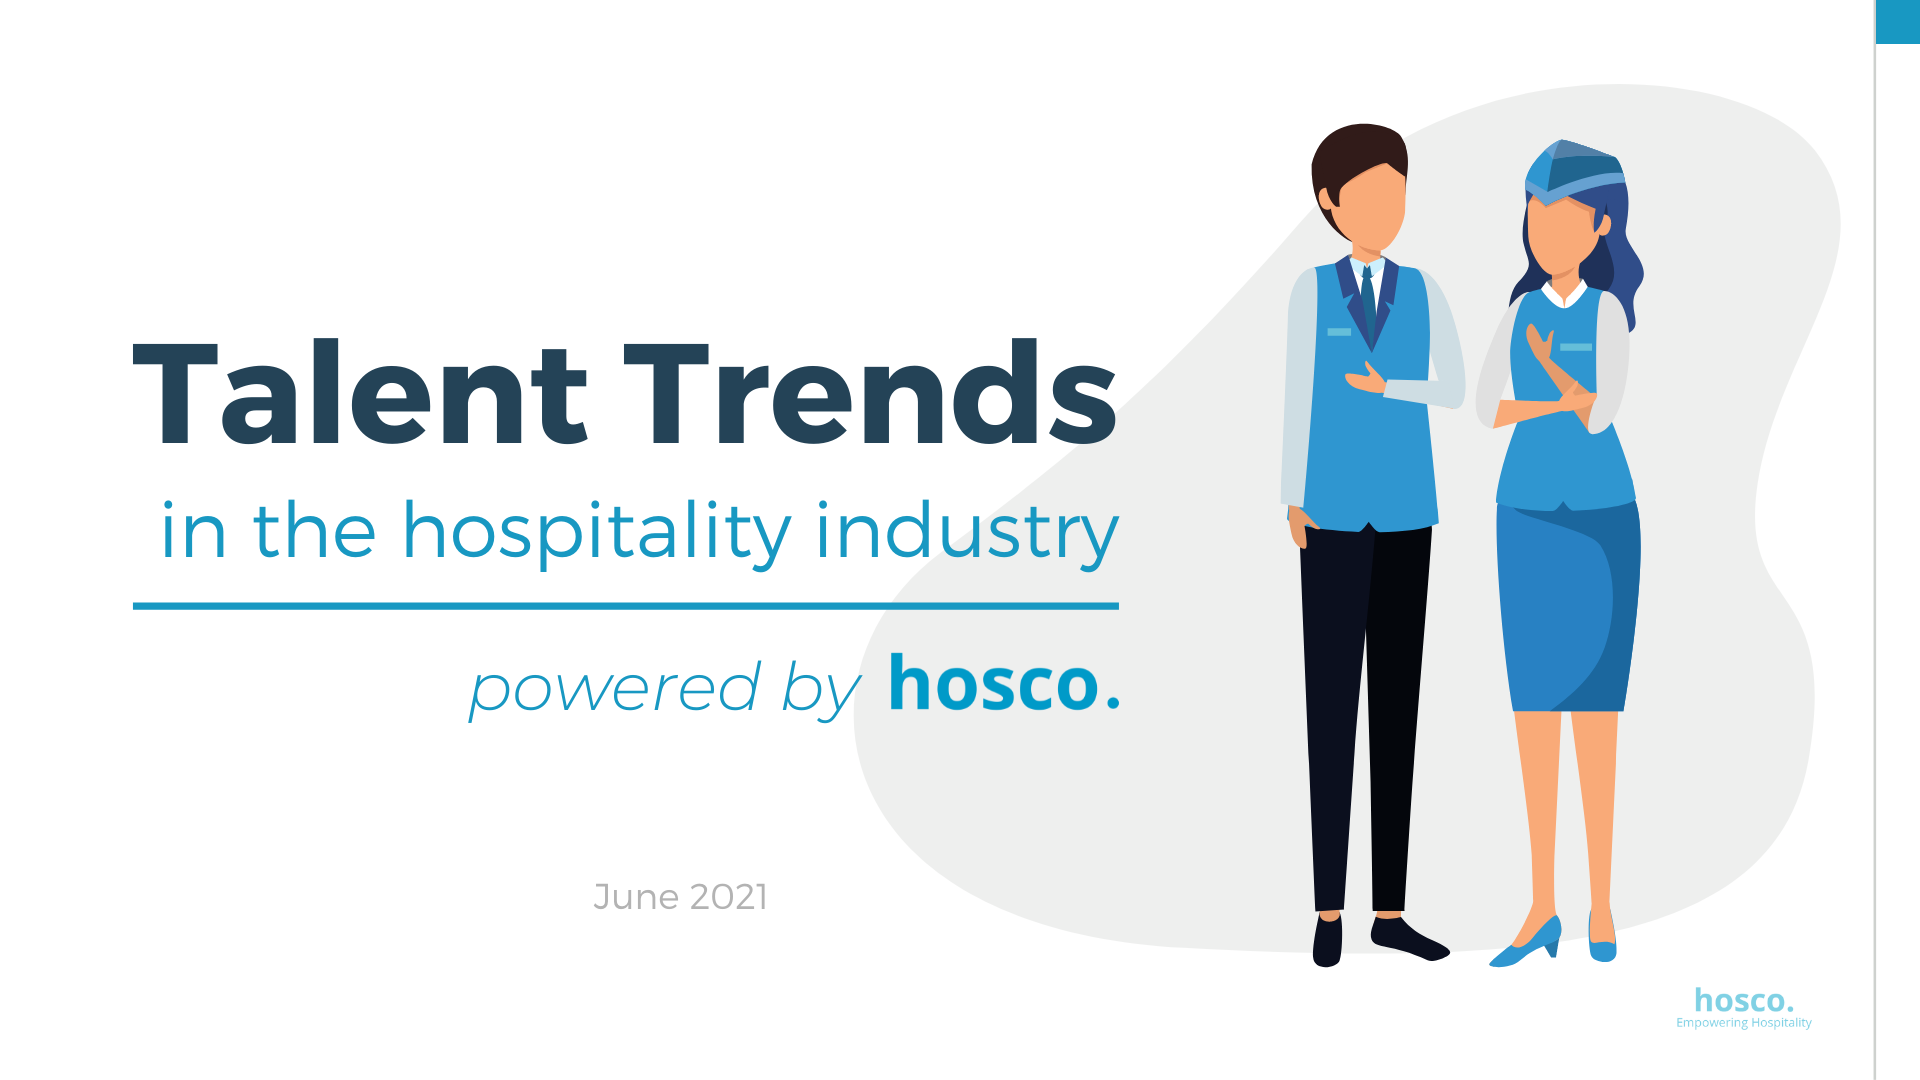 Talent Trends in the Hospitality Industry. Know Your People!